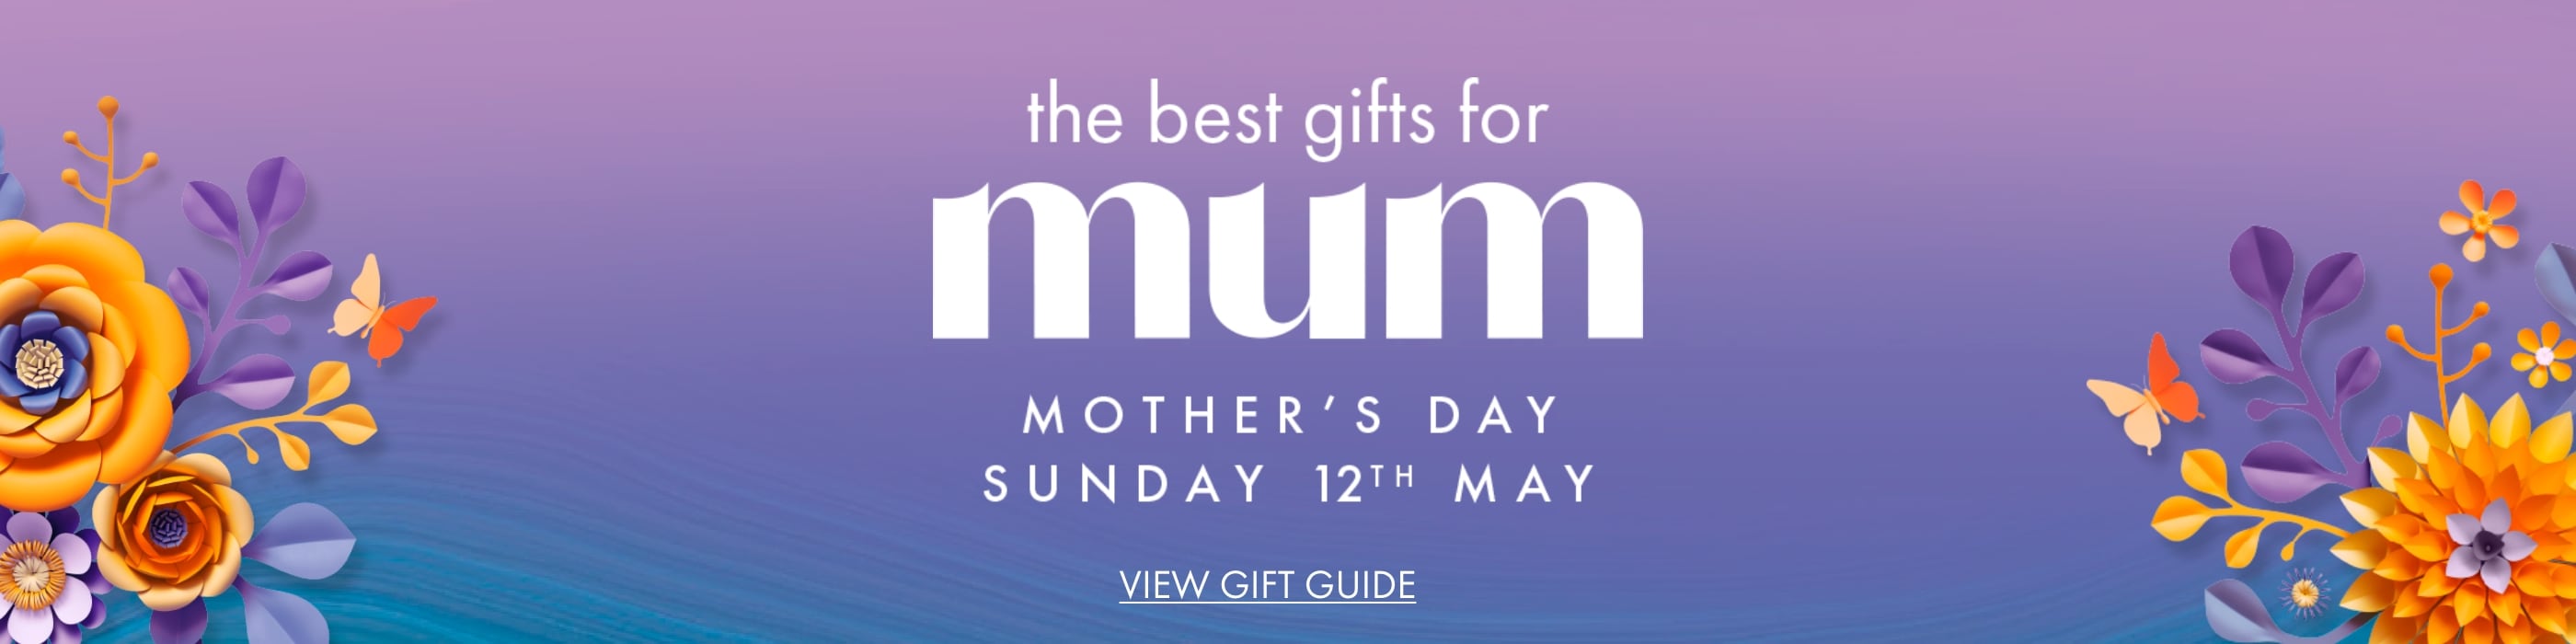 The Best Gifts For Mum | Mother's Day Sunday 12th May!